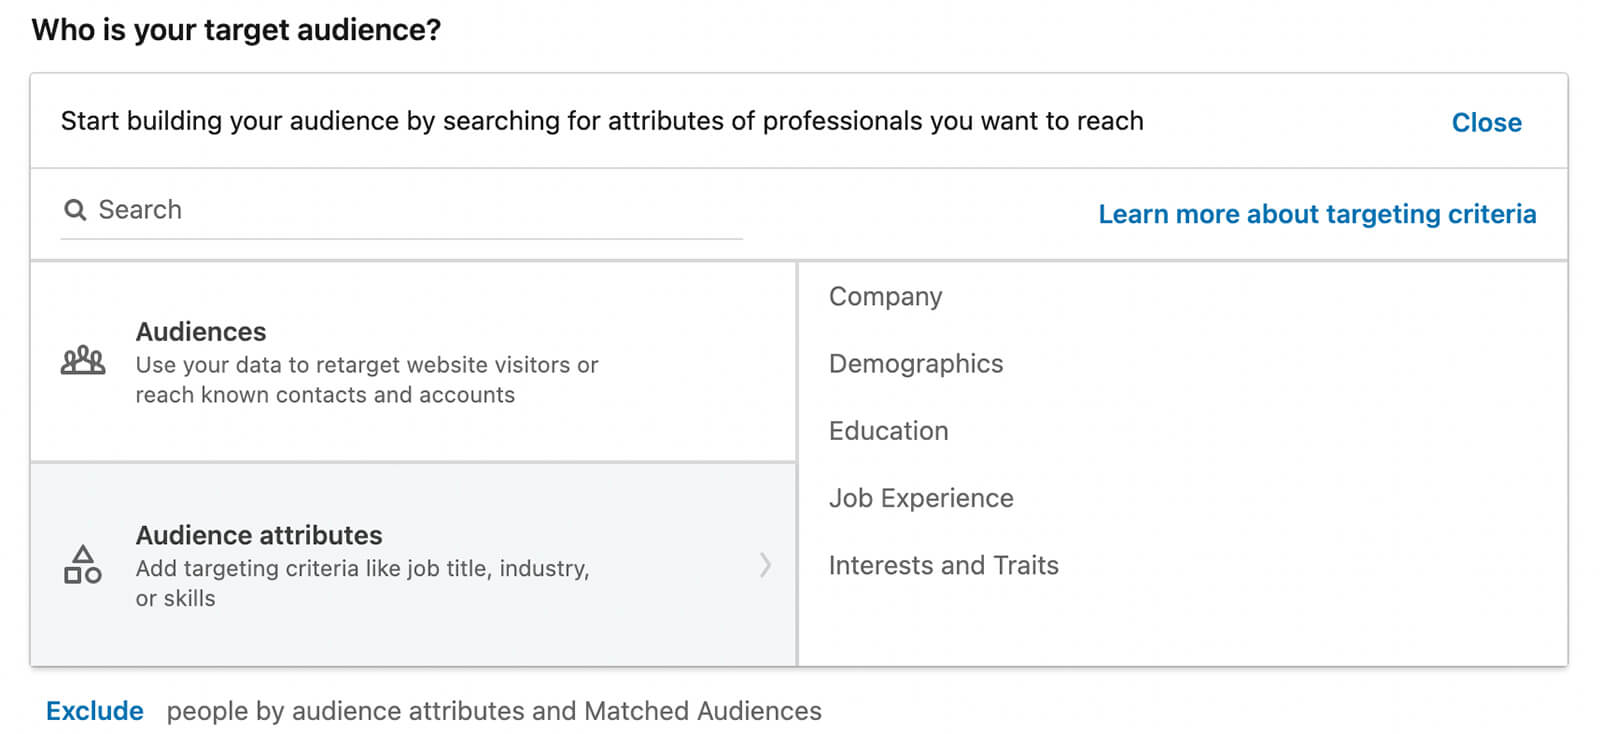 how-to-create-a-linkedin-document-ad-select-campaign-objective-build-a-target-audience-marketing-goals-attributes-professionals-example-4